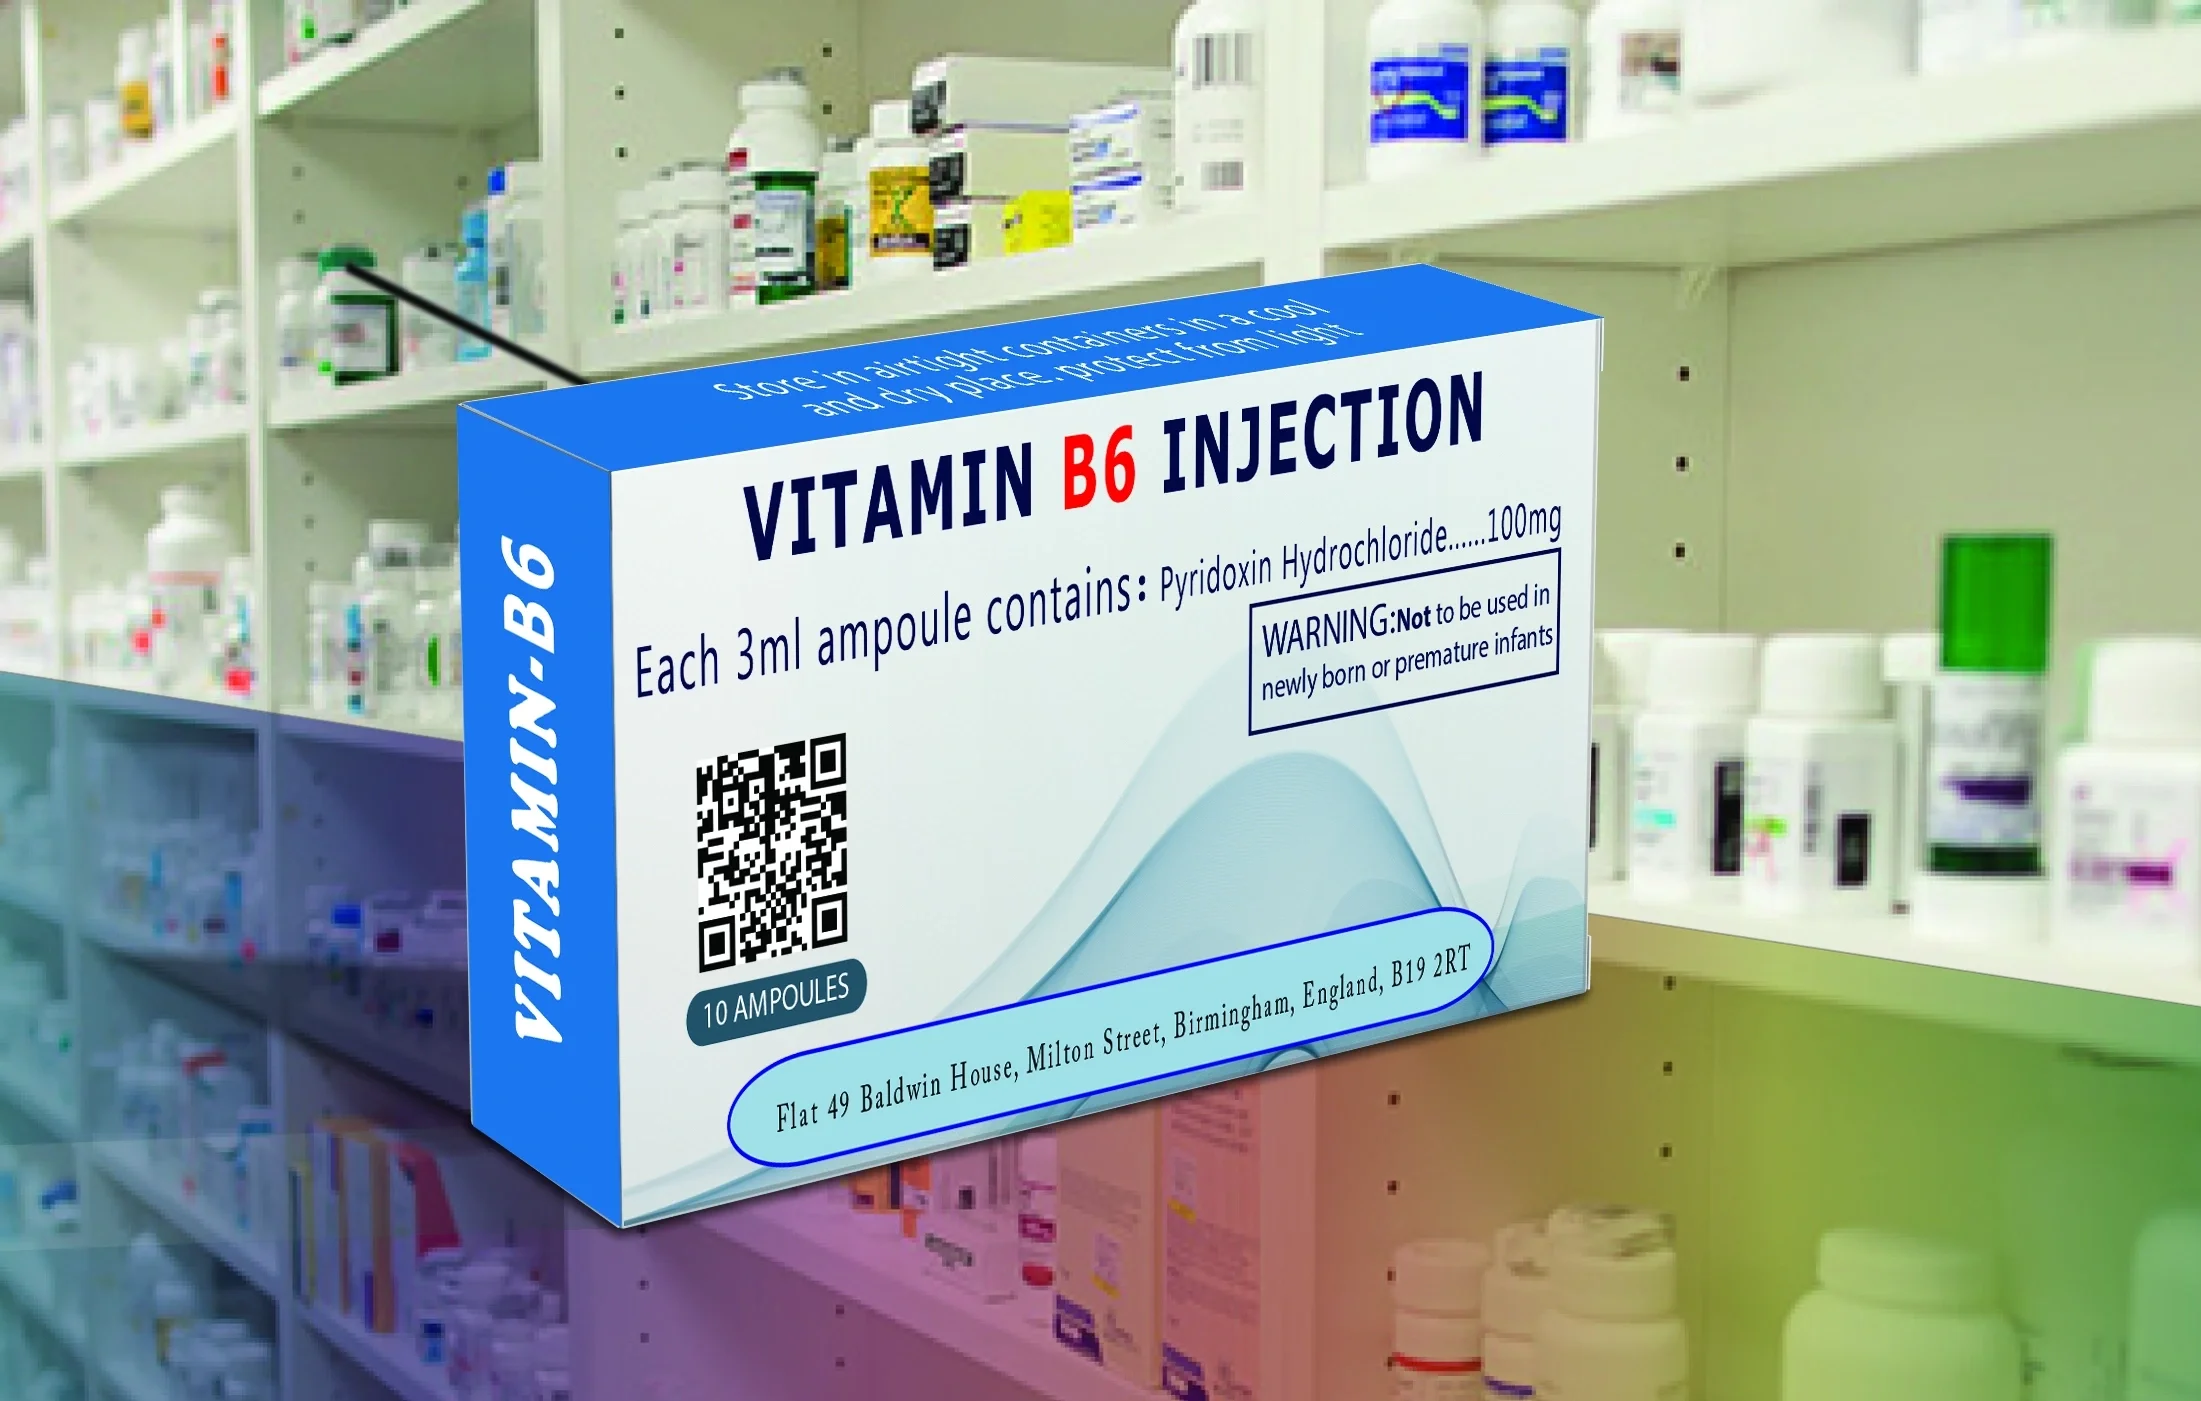 'Products registration', 'Vitamin b6 injection'